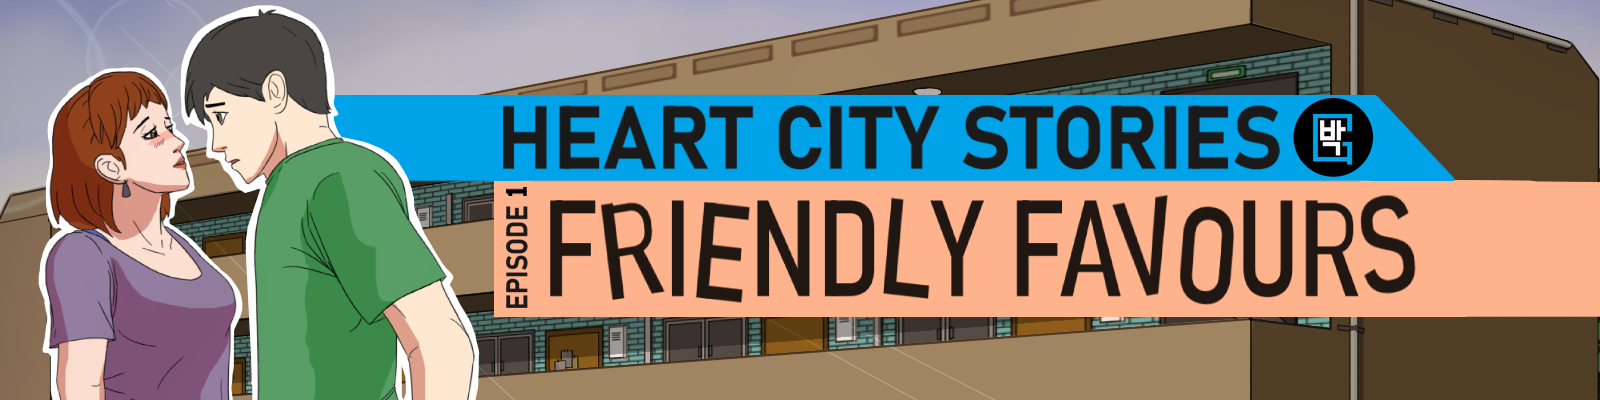 Heart City Stories Ep. 1: Friendly Favours